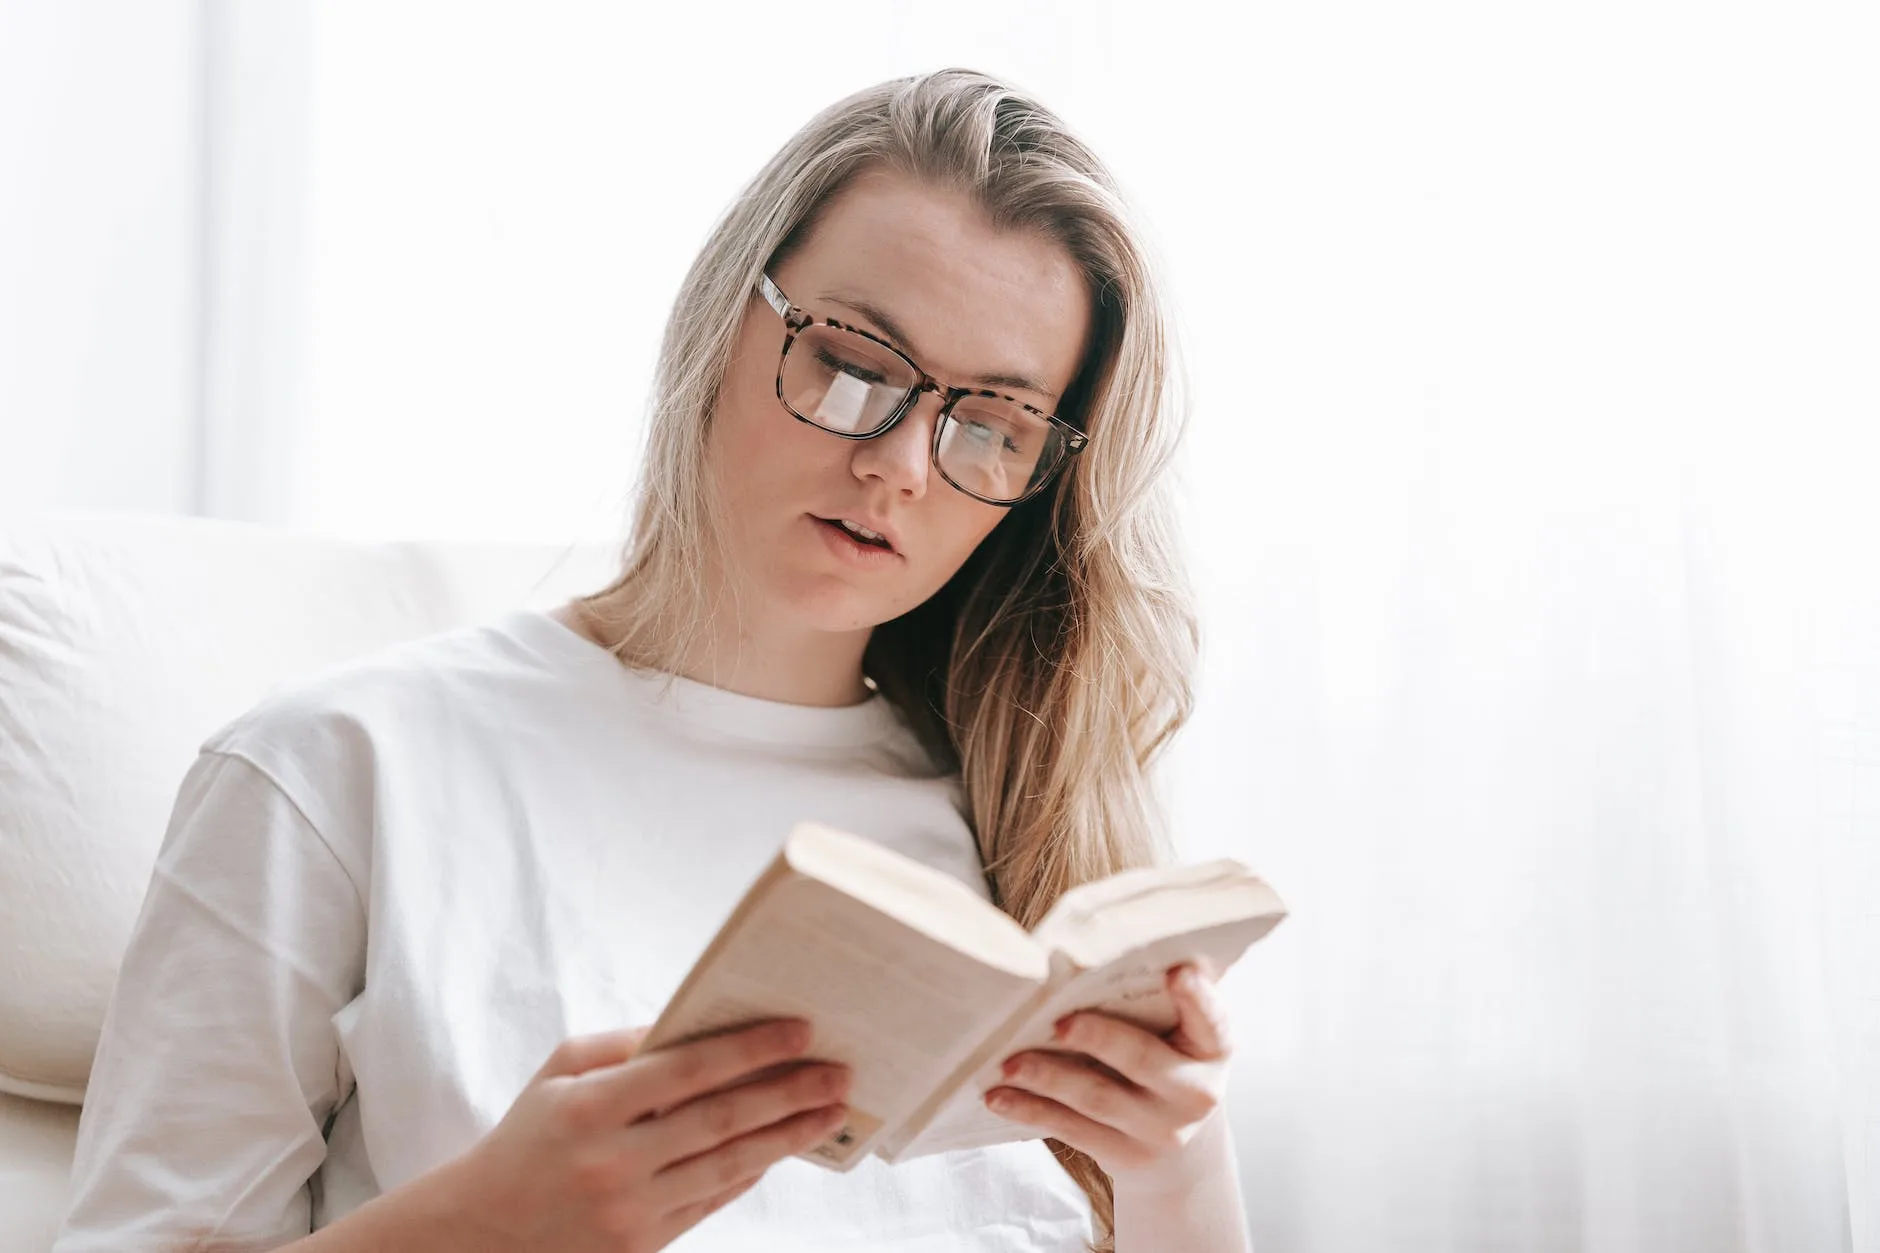 Avoin suhde voi sopia kenelle vaan, joka uskaltaa olla avoimin mielin. George Milton on <a href="https://www.pexels.com/photo/young-woman-in-eyeglasses-reading-book-at-spare-time-7034011/" rel="nofollow">Pexels.com</a>